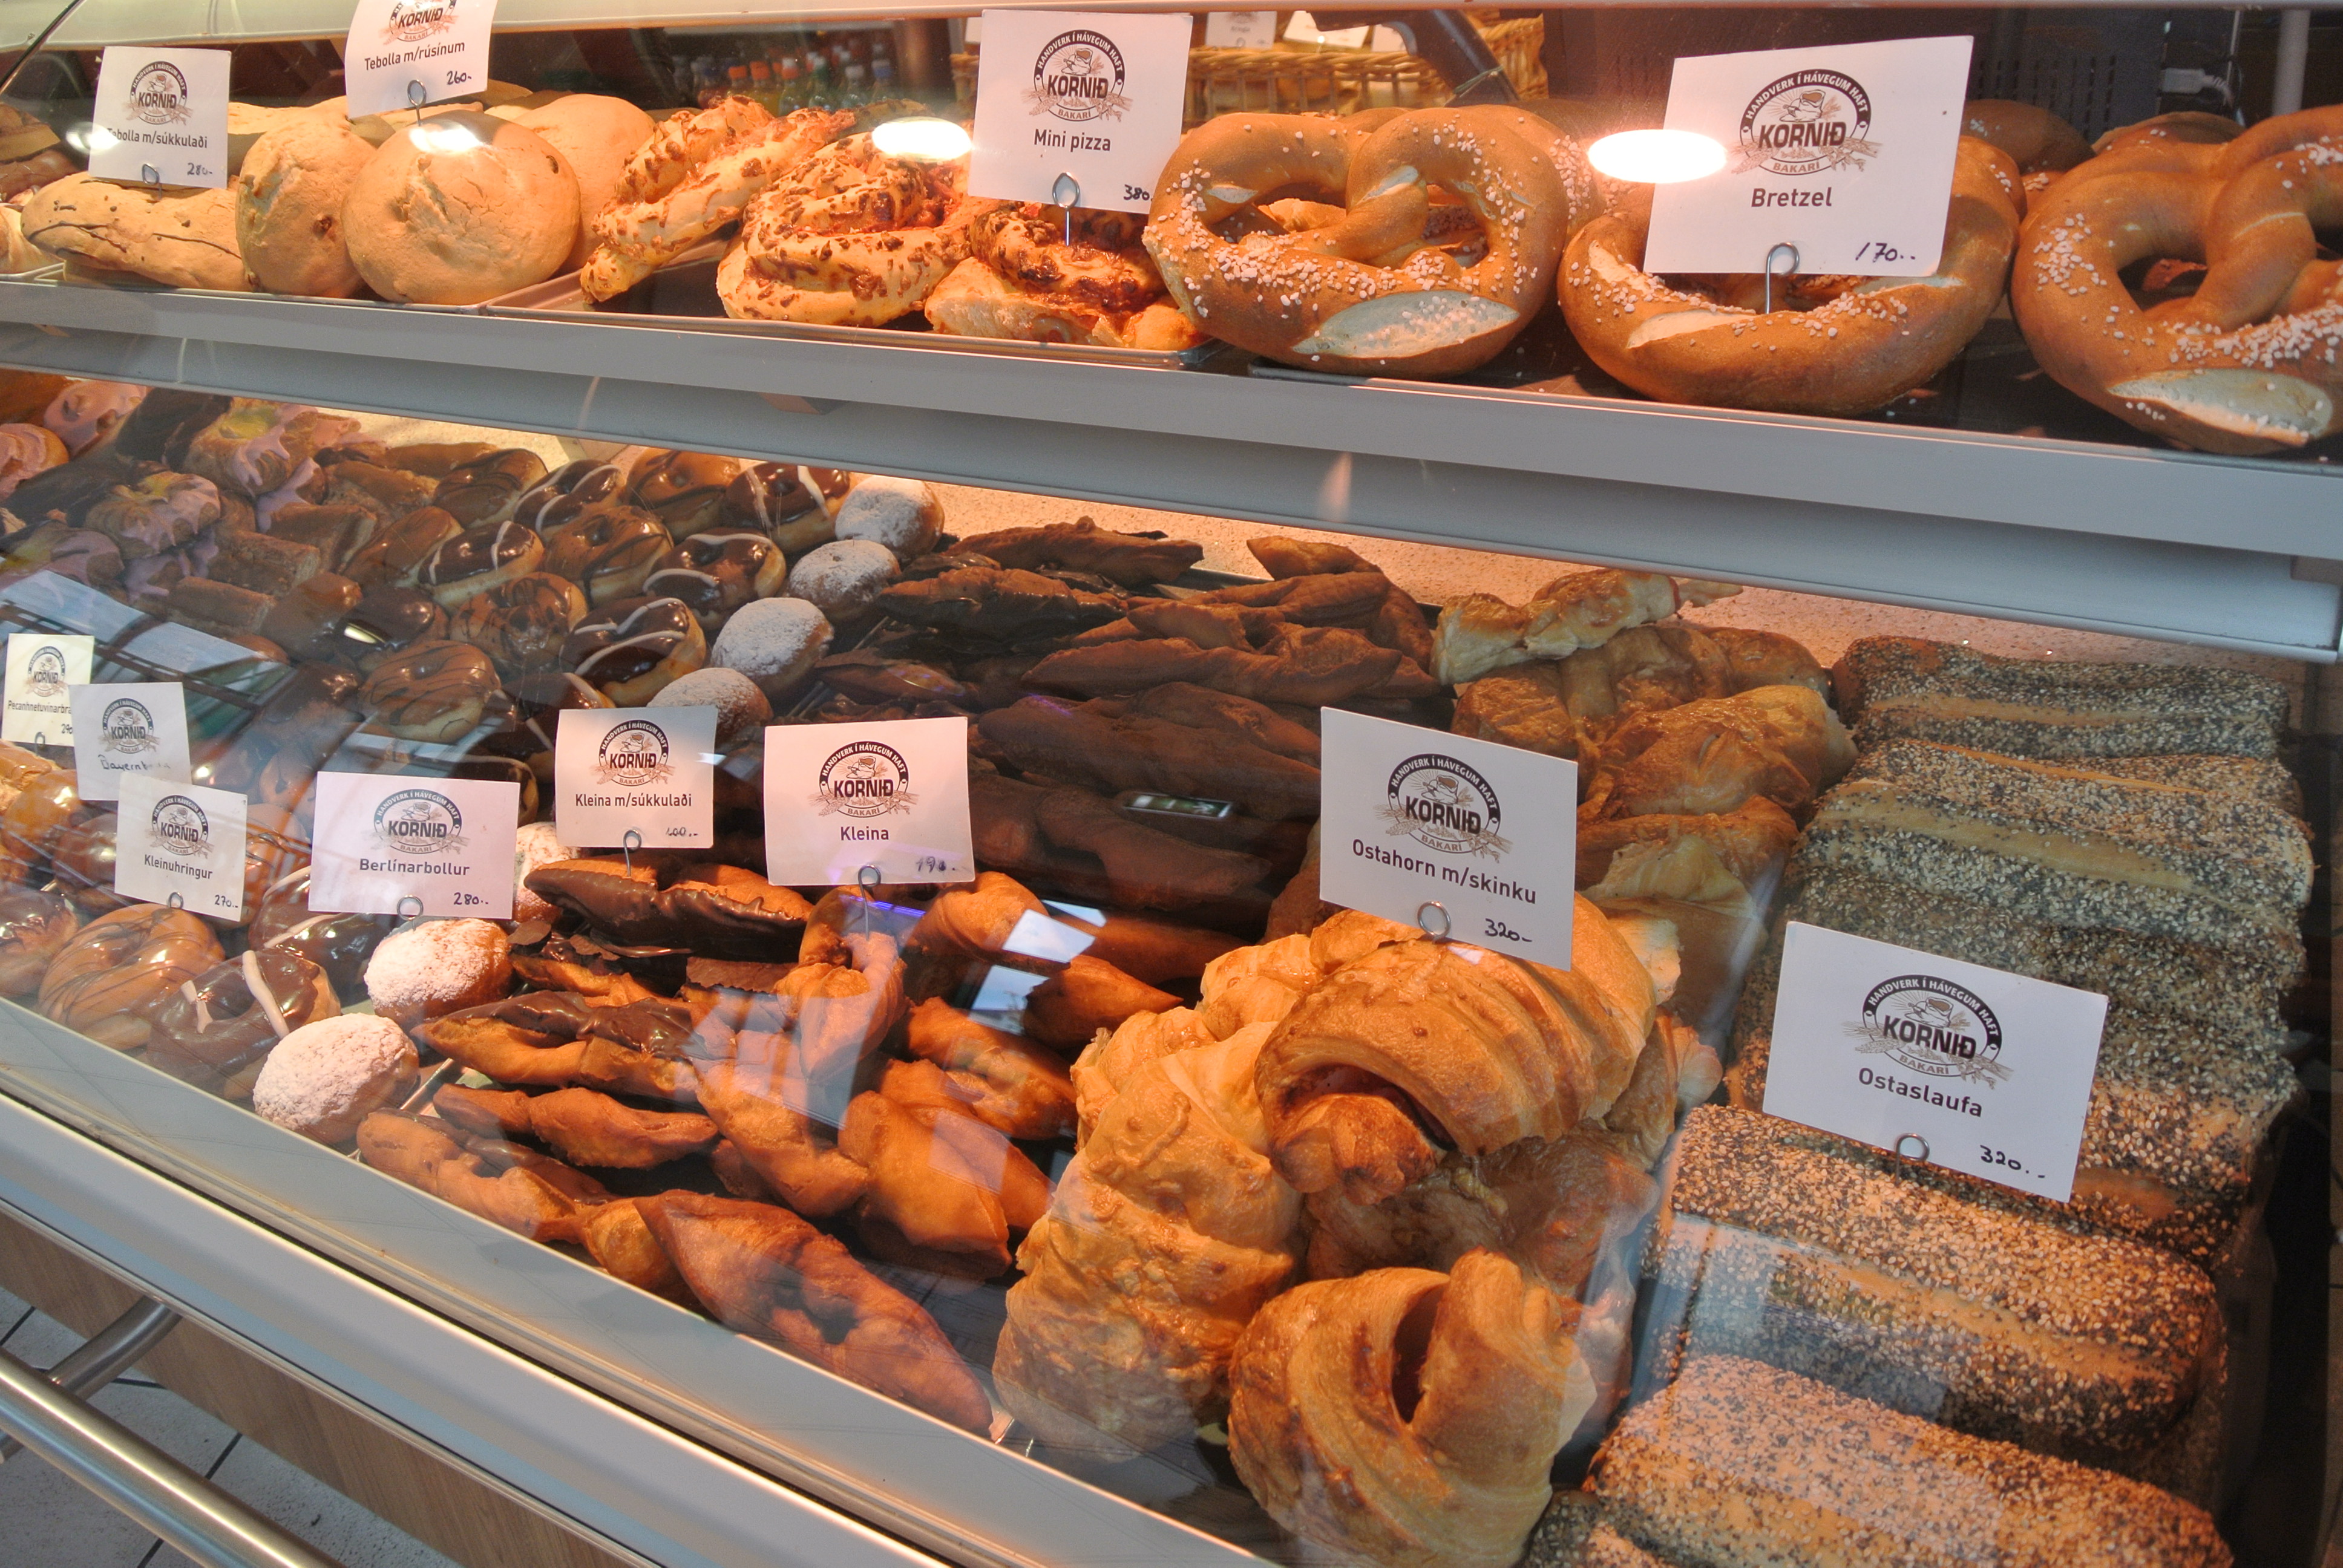 So many different pastries! Hard to choose!